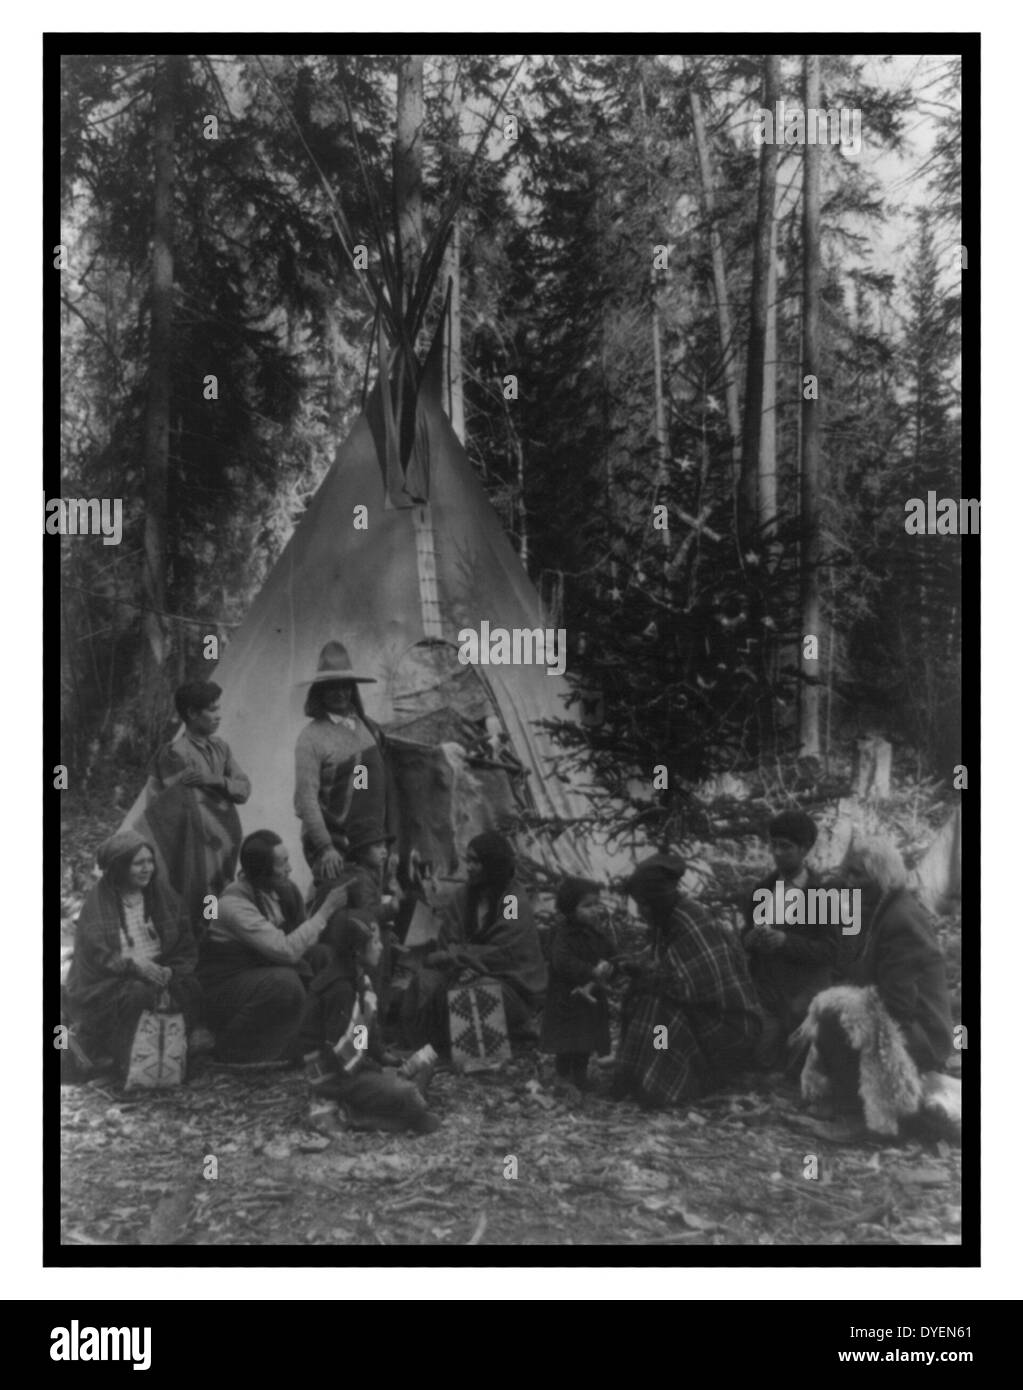 Flathead Indians holding pre-Christmas family gatherings on the west side of Glacier National Park, in the dense forest of evergreen trees that skirt the Rocky Mountains [between 1900 and 1920] Stock Photo